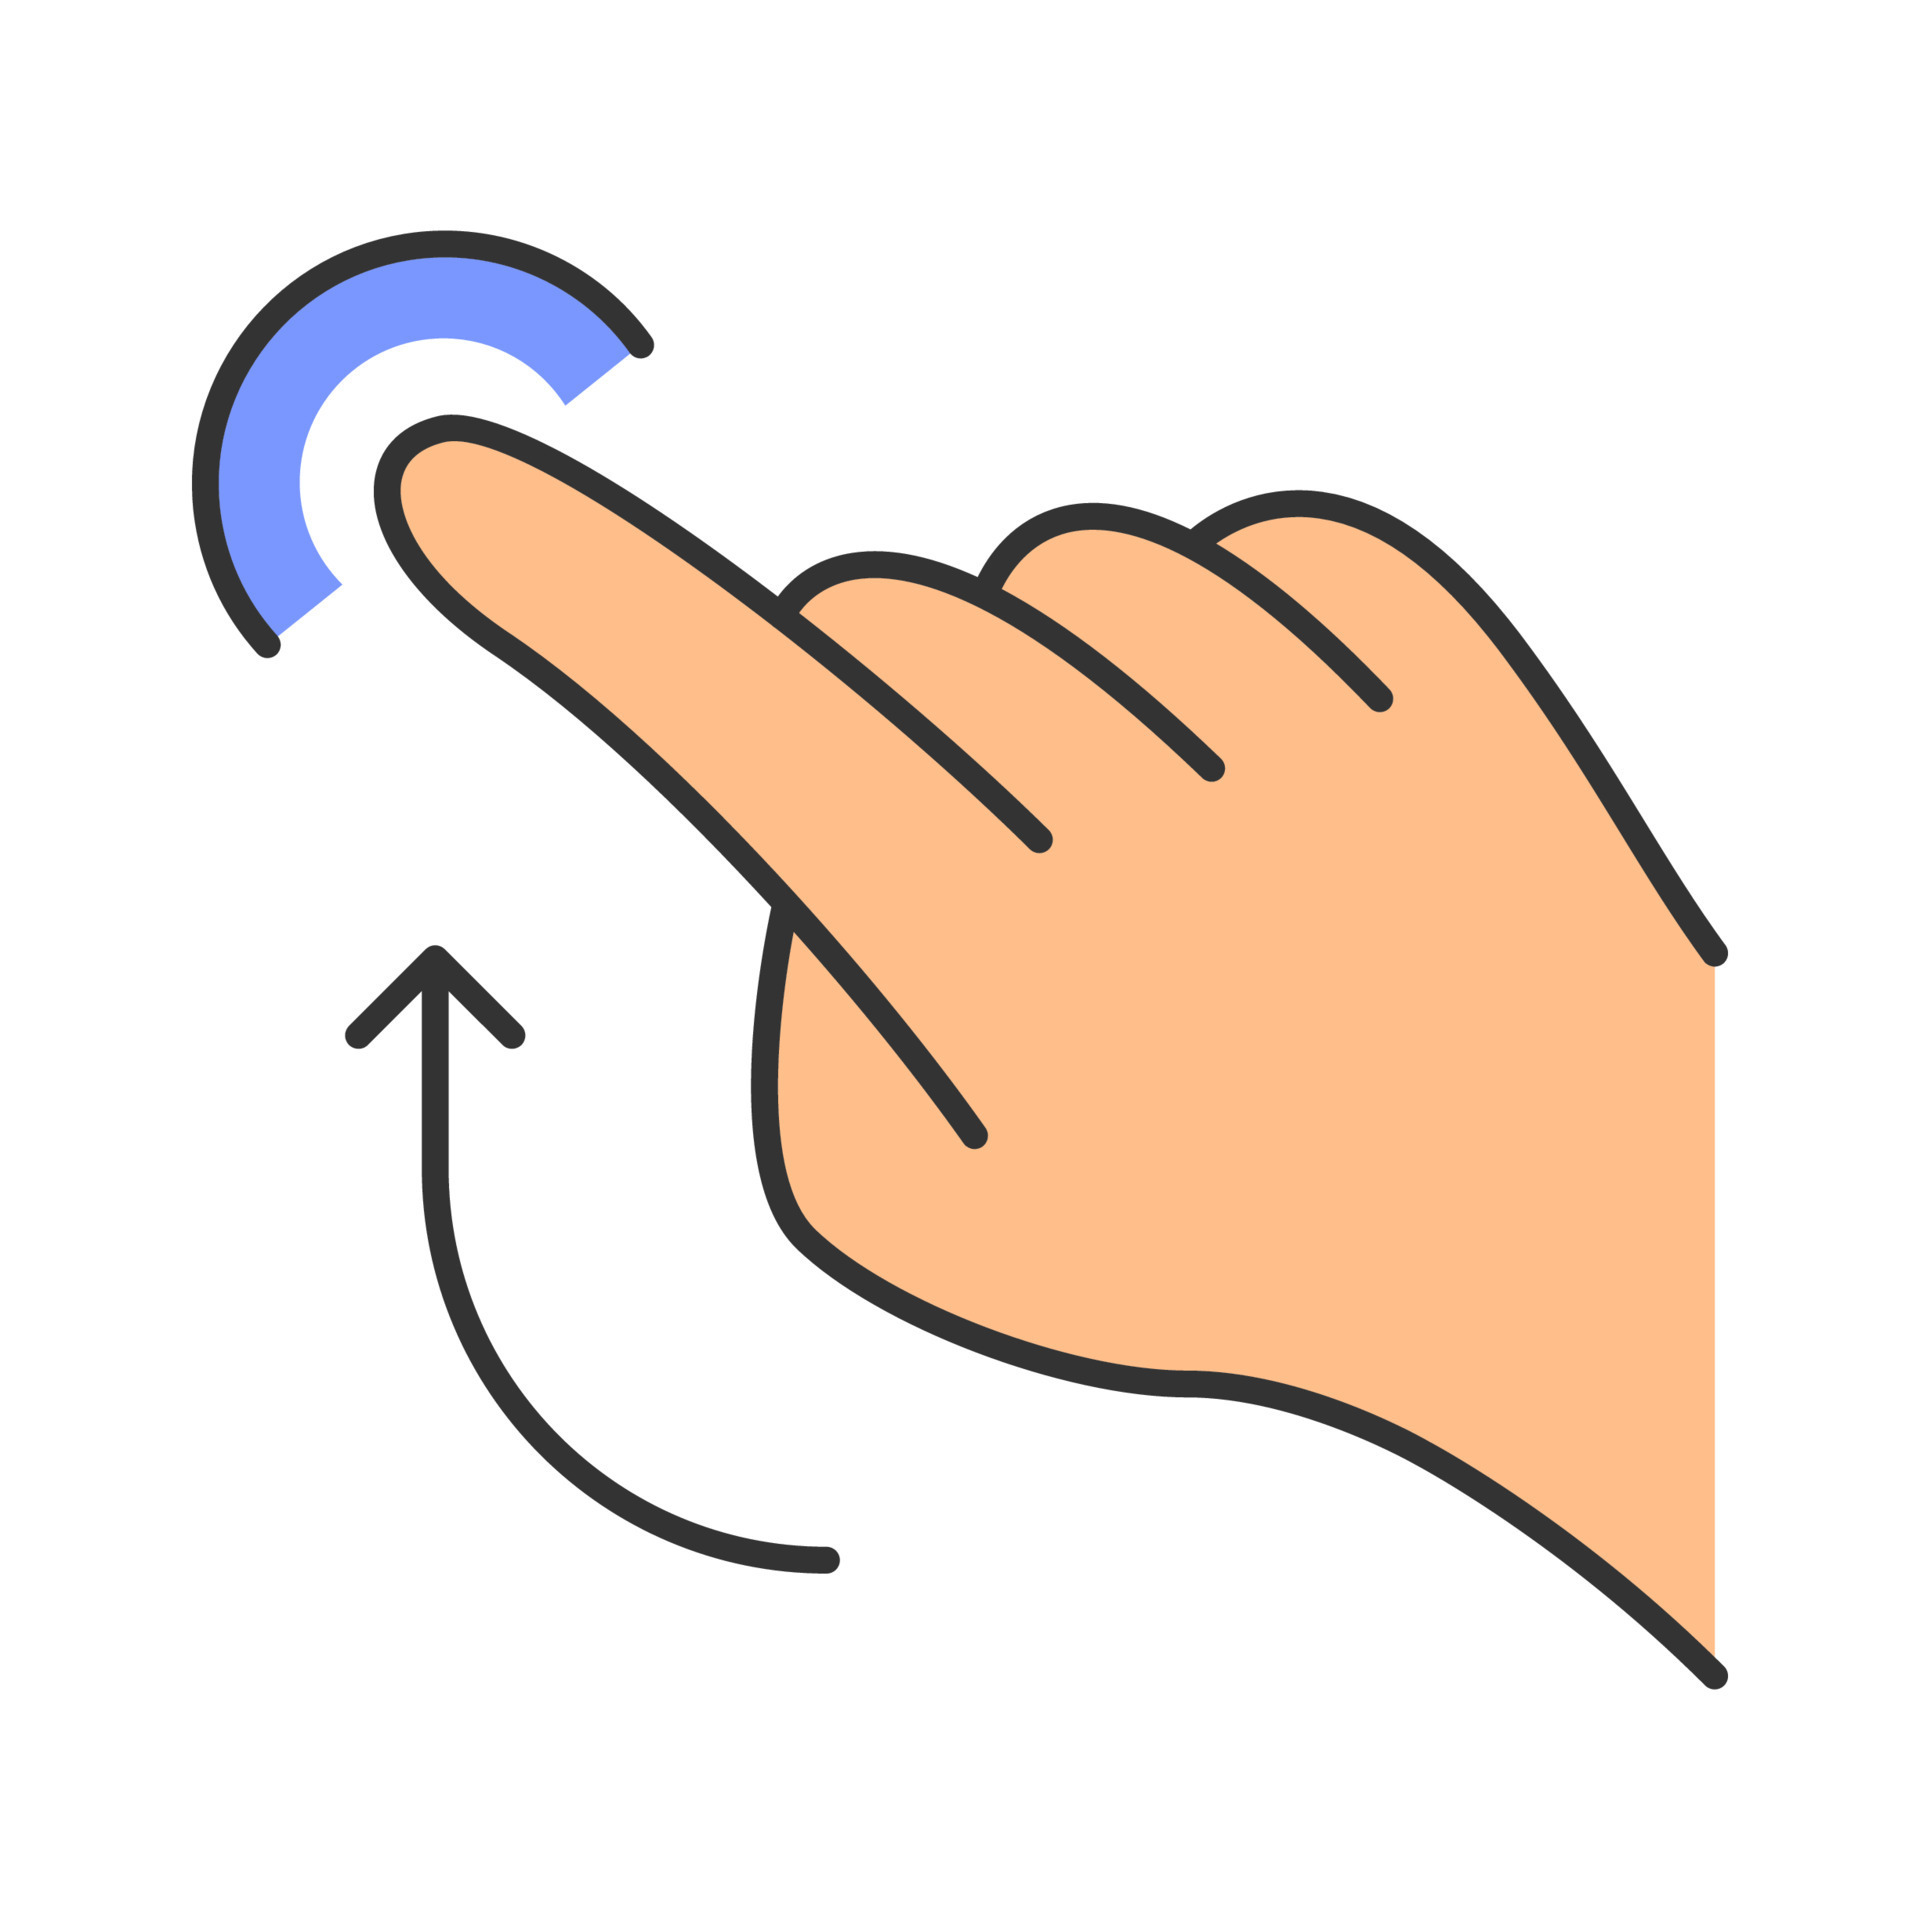 https://static.vecteezy.com/system/resources/previews/008/198/008/original/flick-up-gesture-color-icon-touchscreen-gesturing-human-hand-and-fingers-tap-point-click-using-sensory-devices-isolated-illustration-vector.jpg